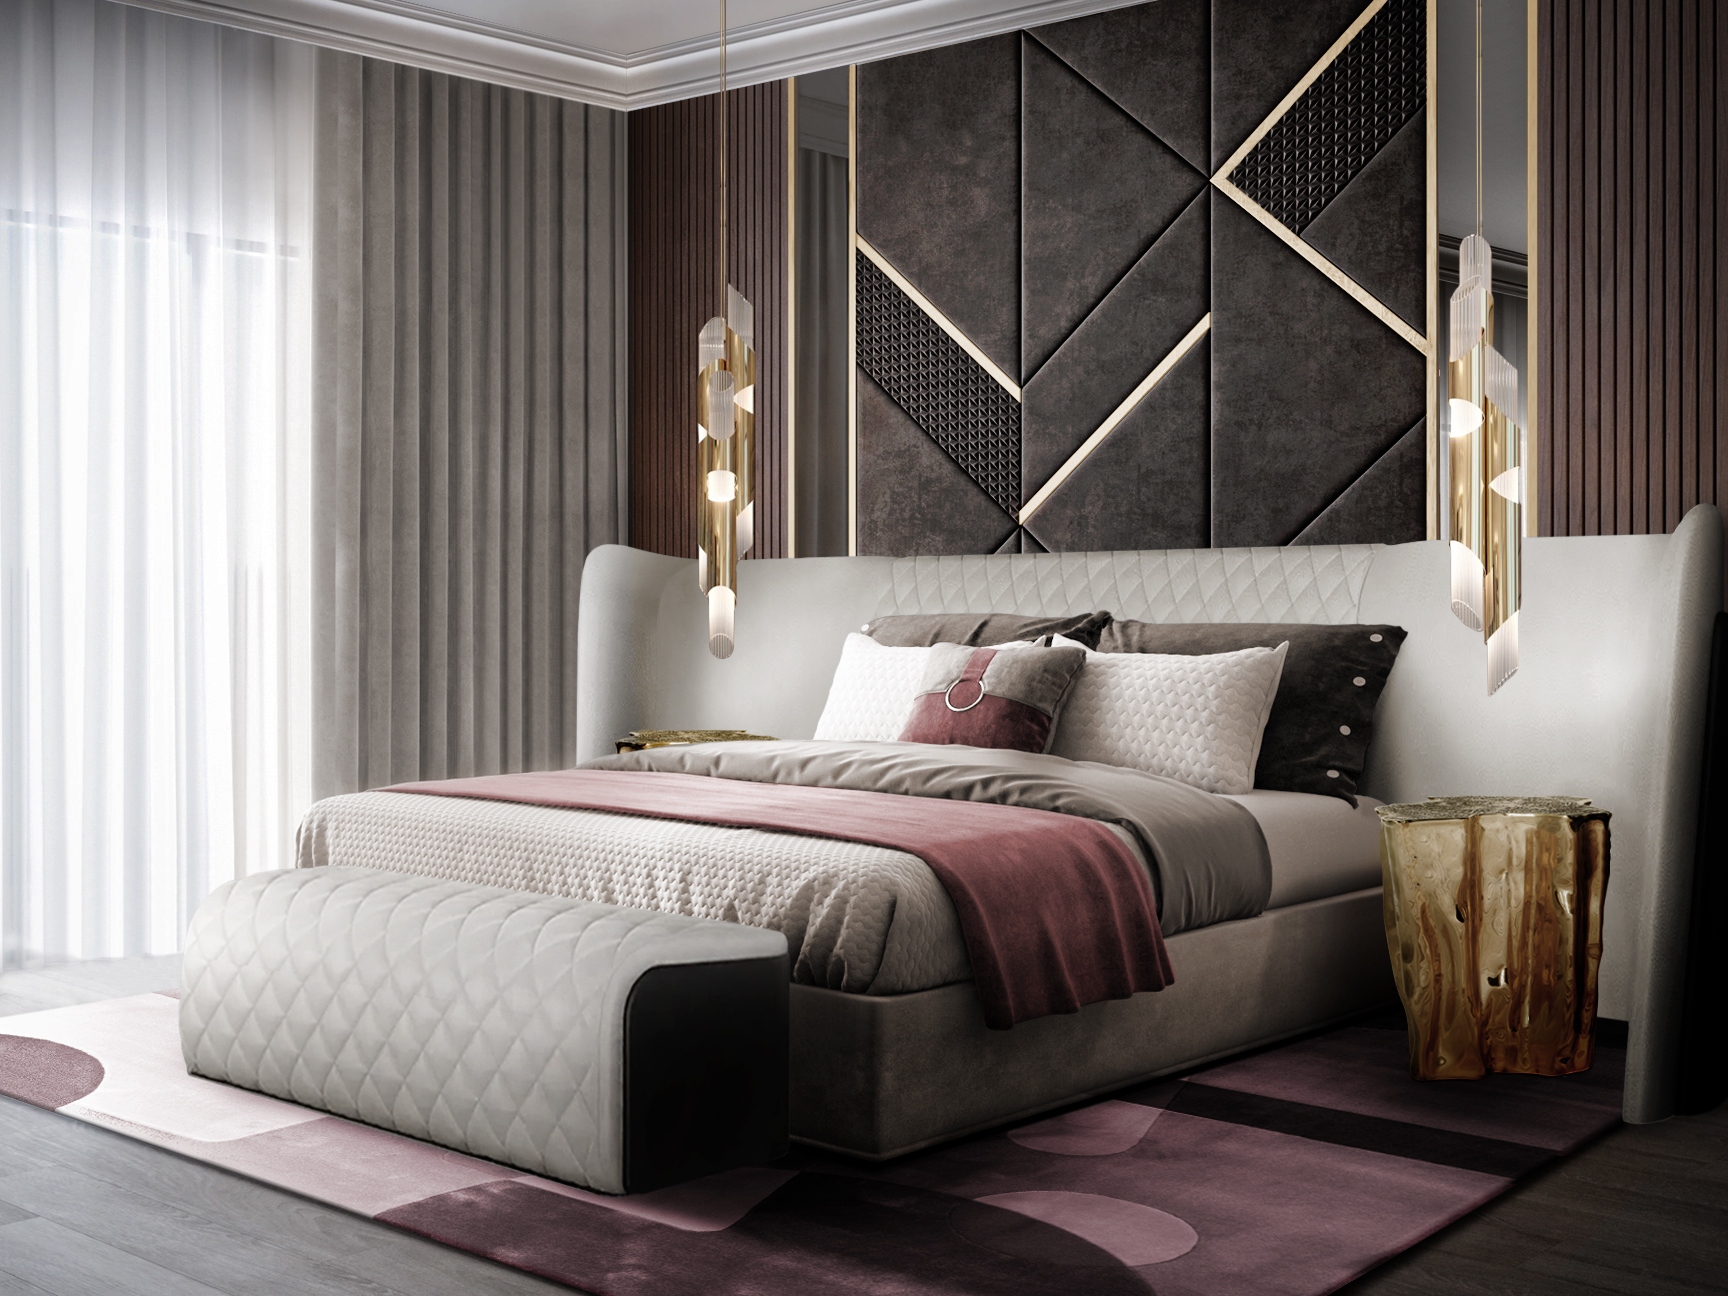 Modern Bedroom Design With Gray Joh Rug by Rug'Society